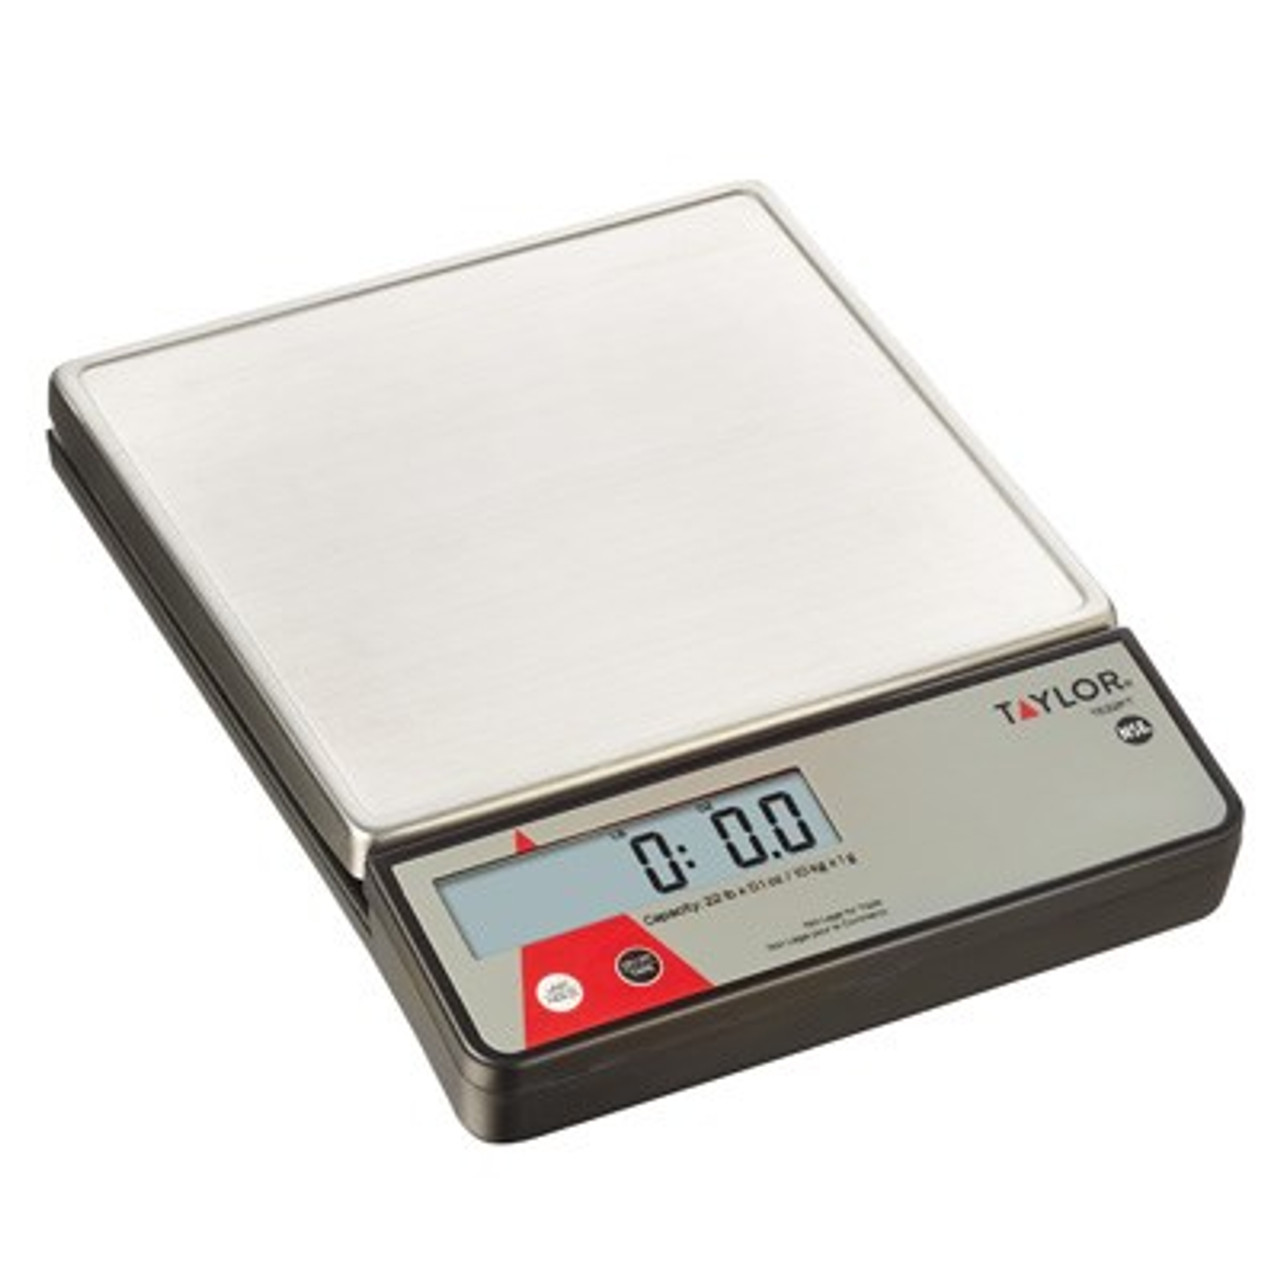 Portion Control Scale, digital, 22 lb x .1 oz./10 kg x 1 g capacity, 0.9" LCD display, 7.15" x 7.15" removable stainless steel platform with marine edge, field calibration feature, tare & hold function, auto-off & disable auto-off feature (powered by batteries), low battery & overload indicators, uses AC adapter (included) or (2) AAA batteries (not included), NSF